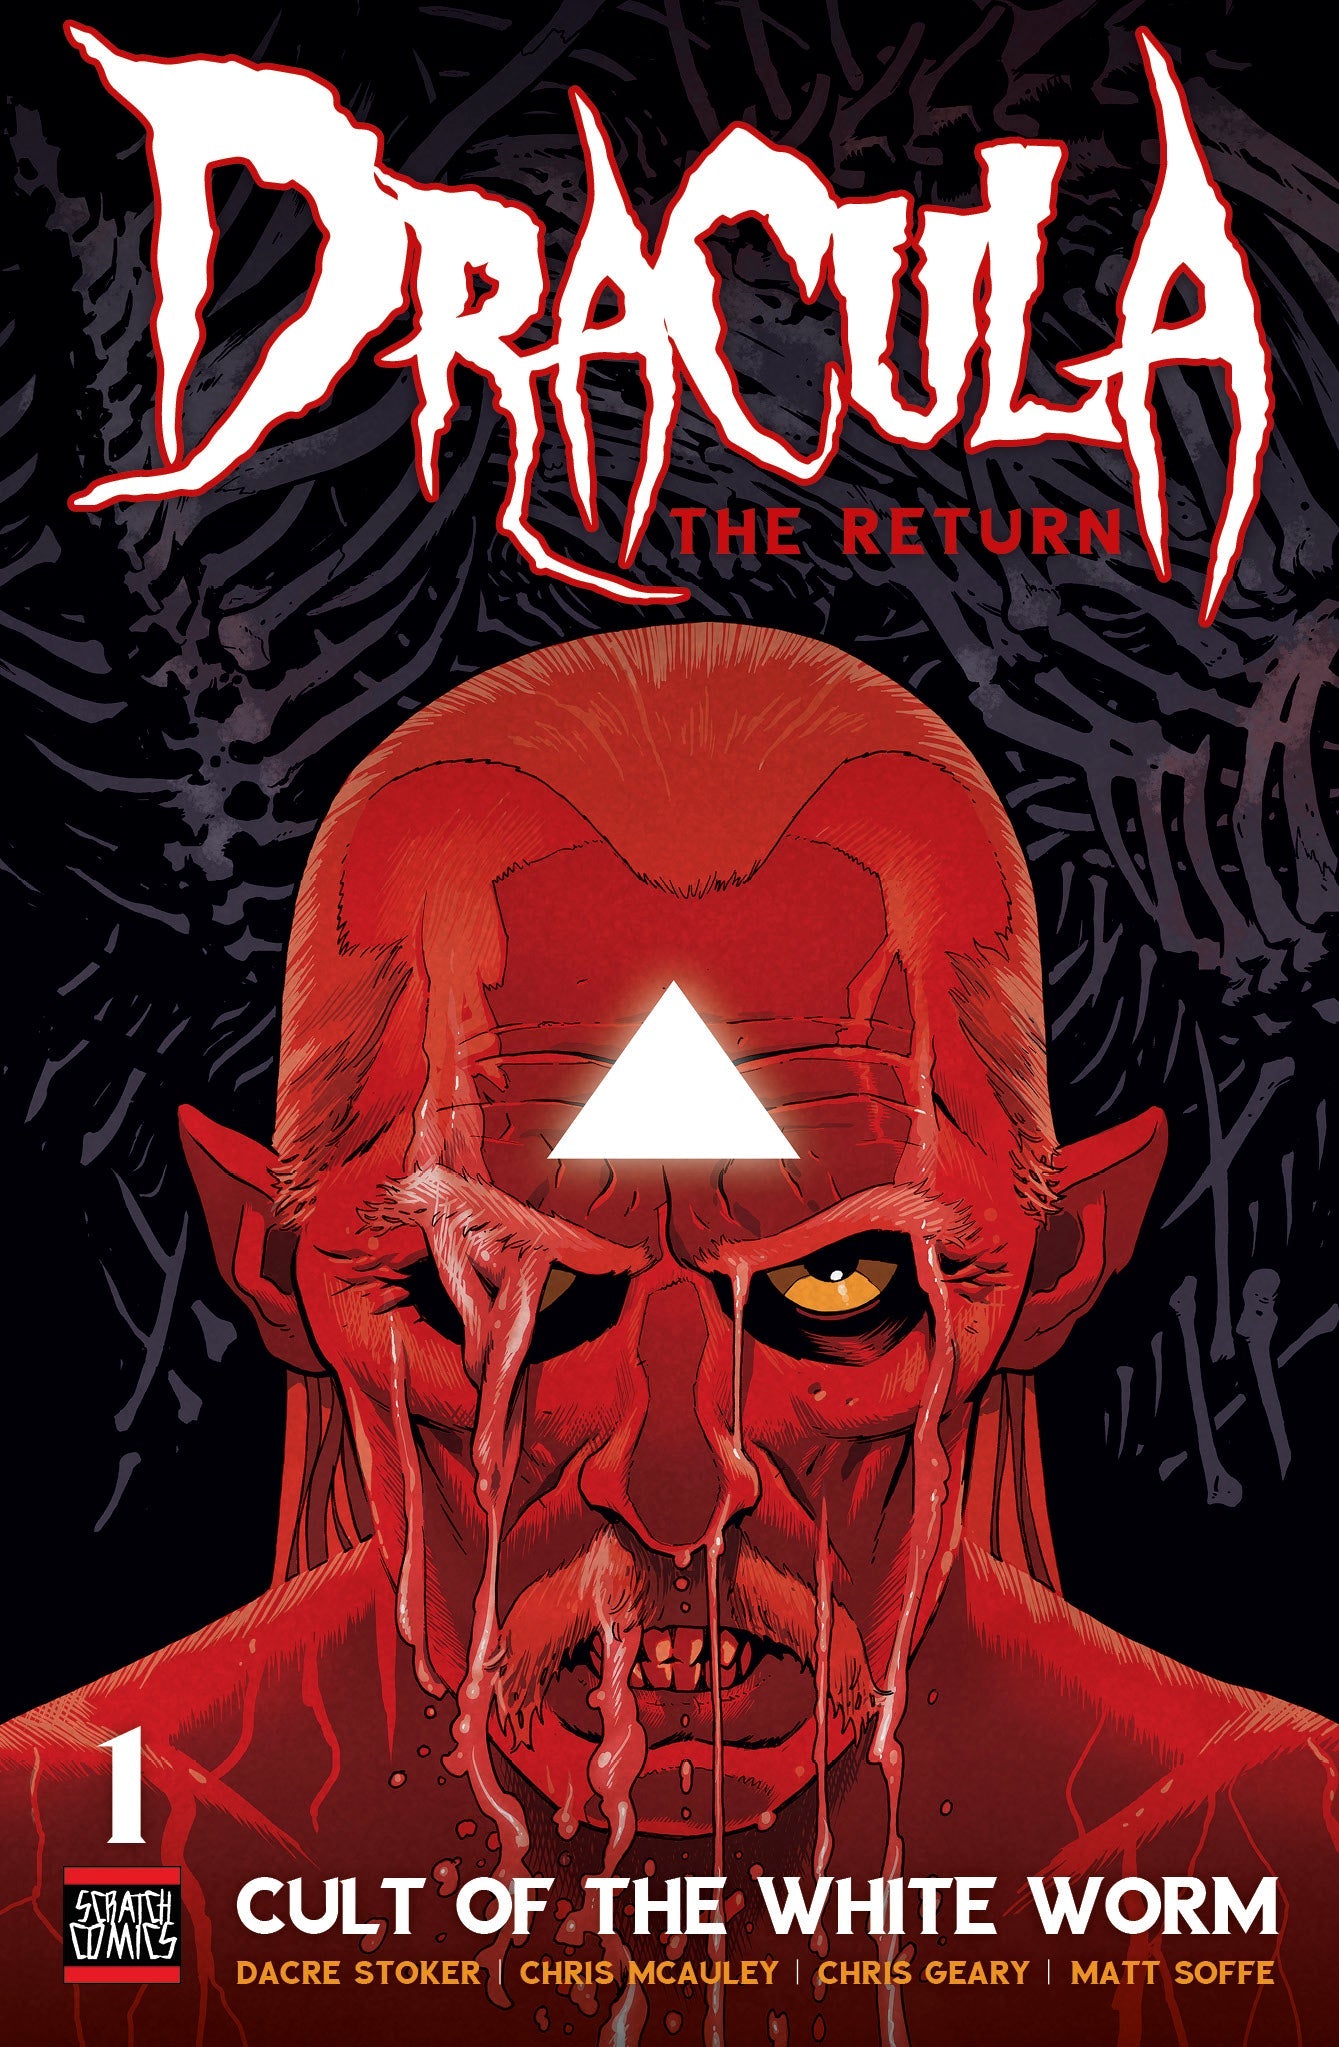 Dracula The Return: Cult of the White Worm #1